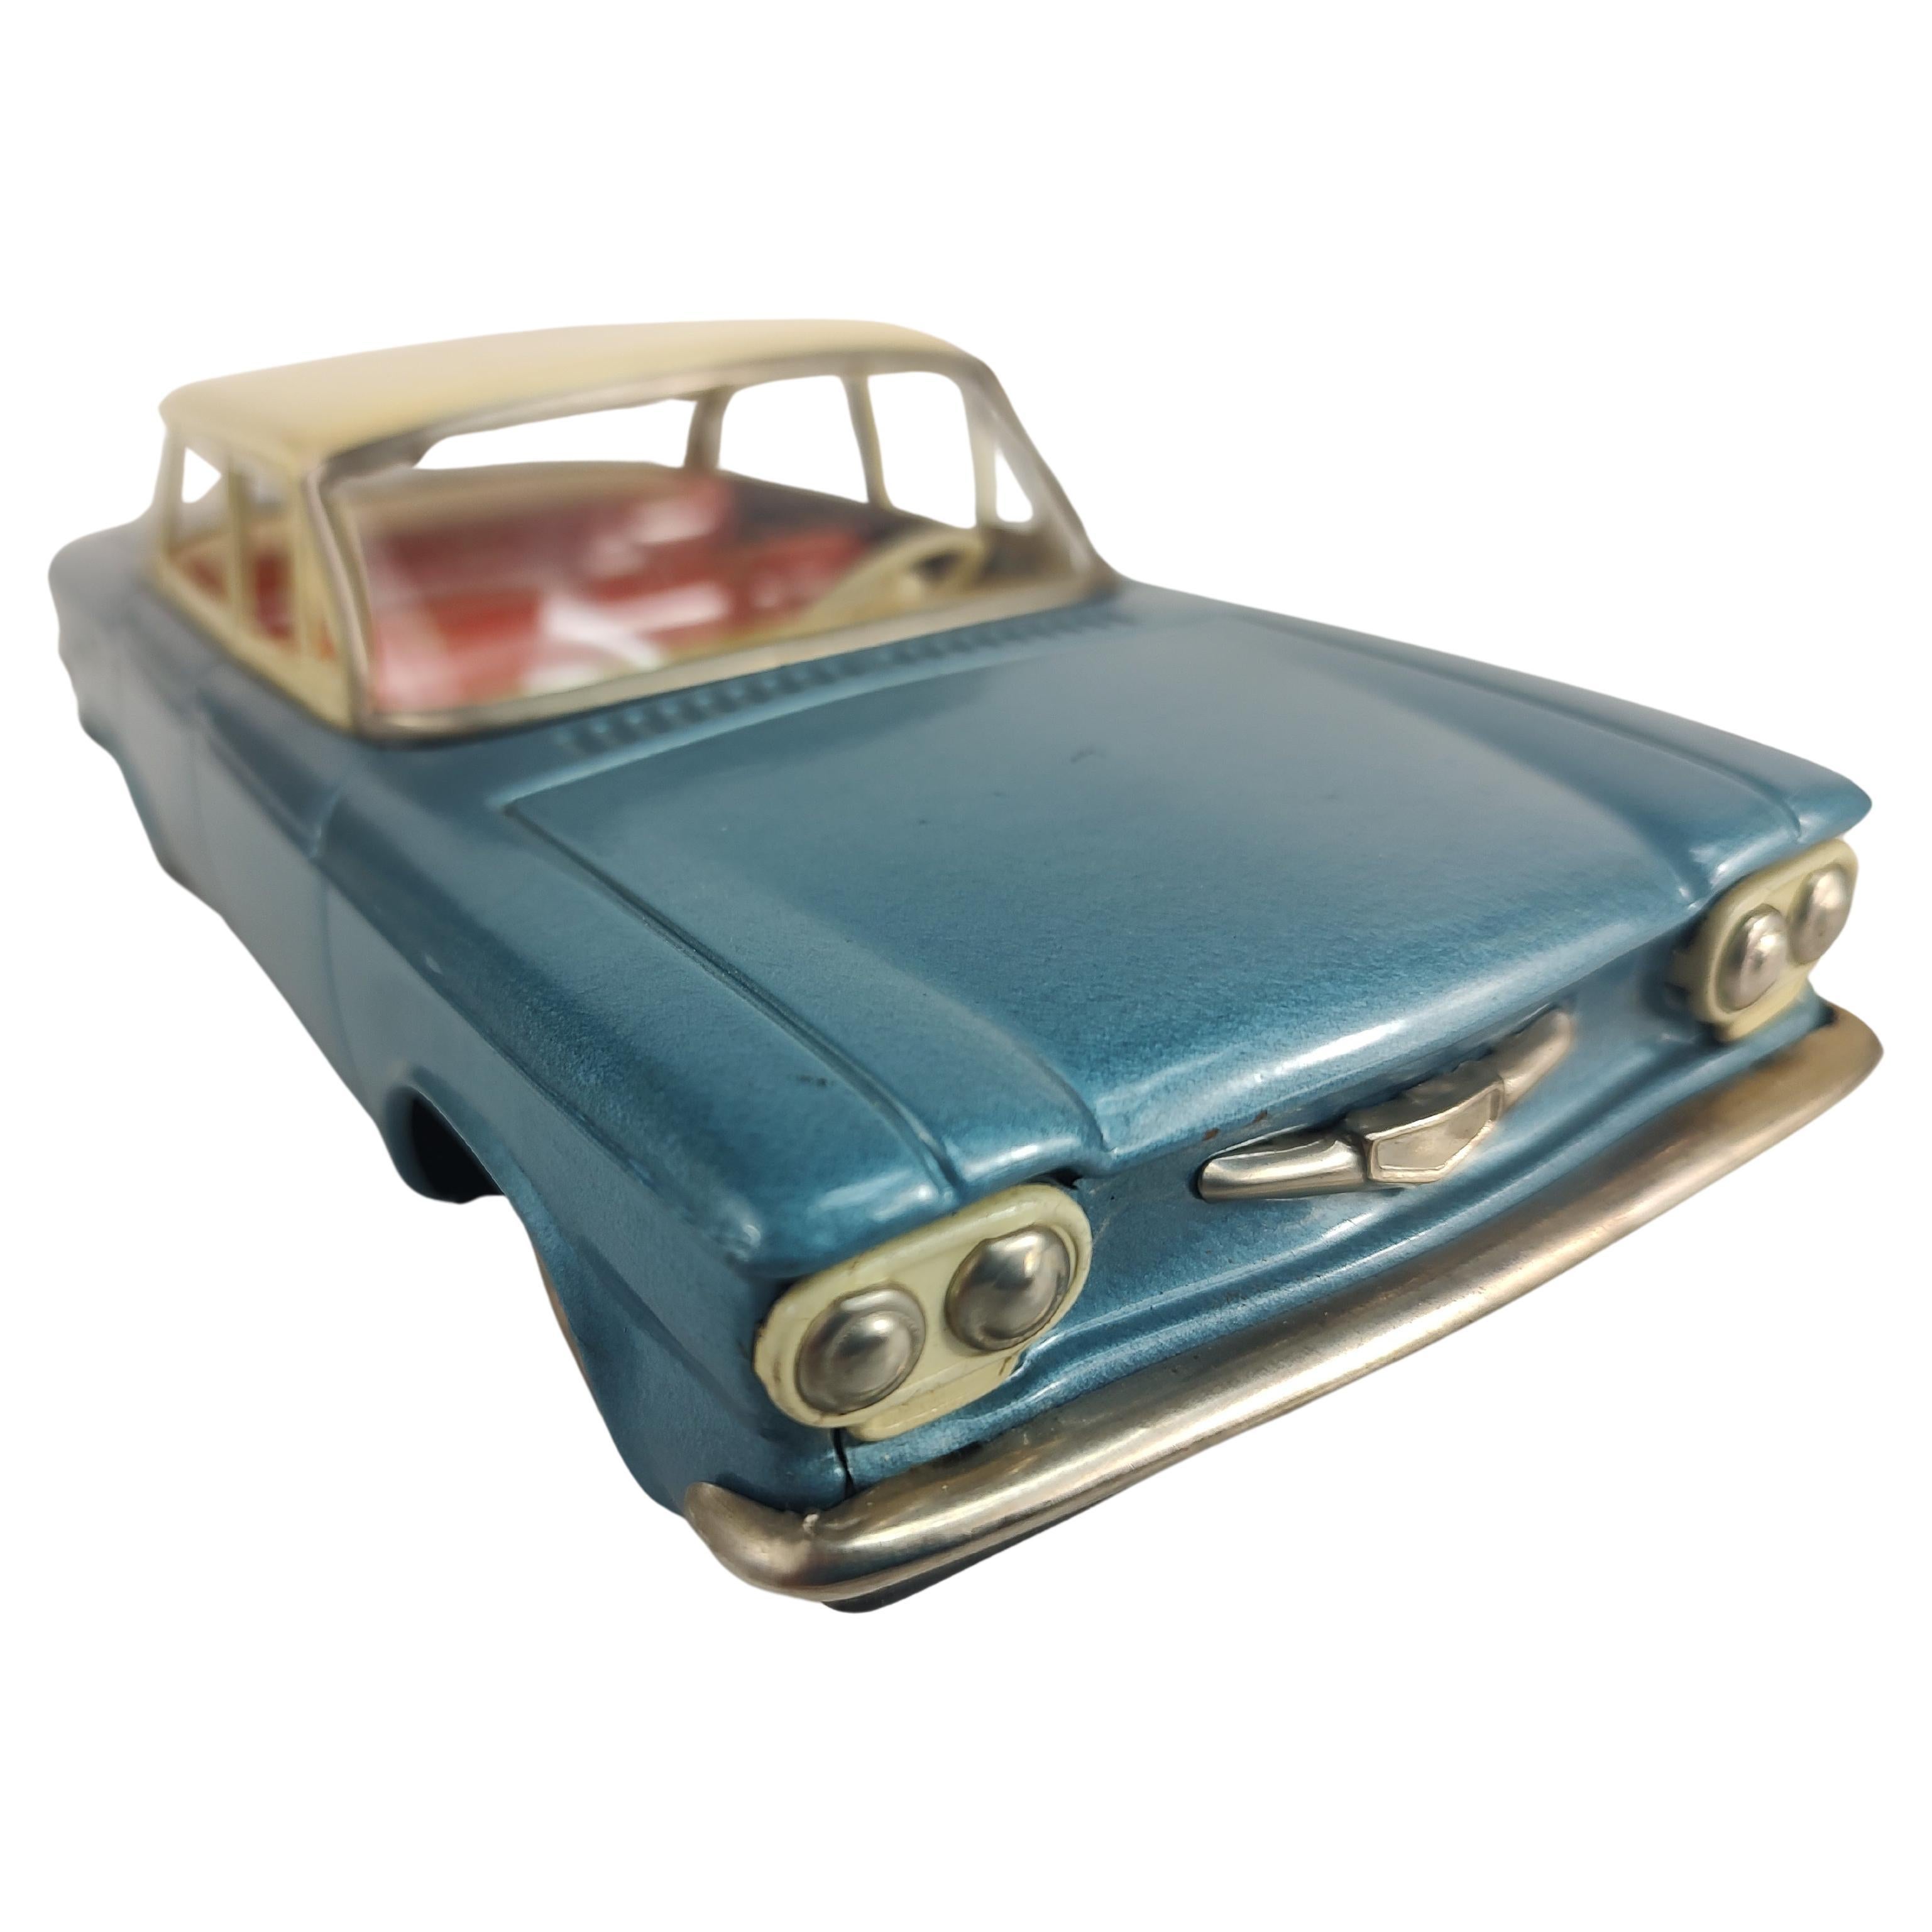 Fantastic tin litho friction Chevy Corvair c1960 in very good condition, near mint. Ralph Nadar of course made the Corvair infamous in his book, 